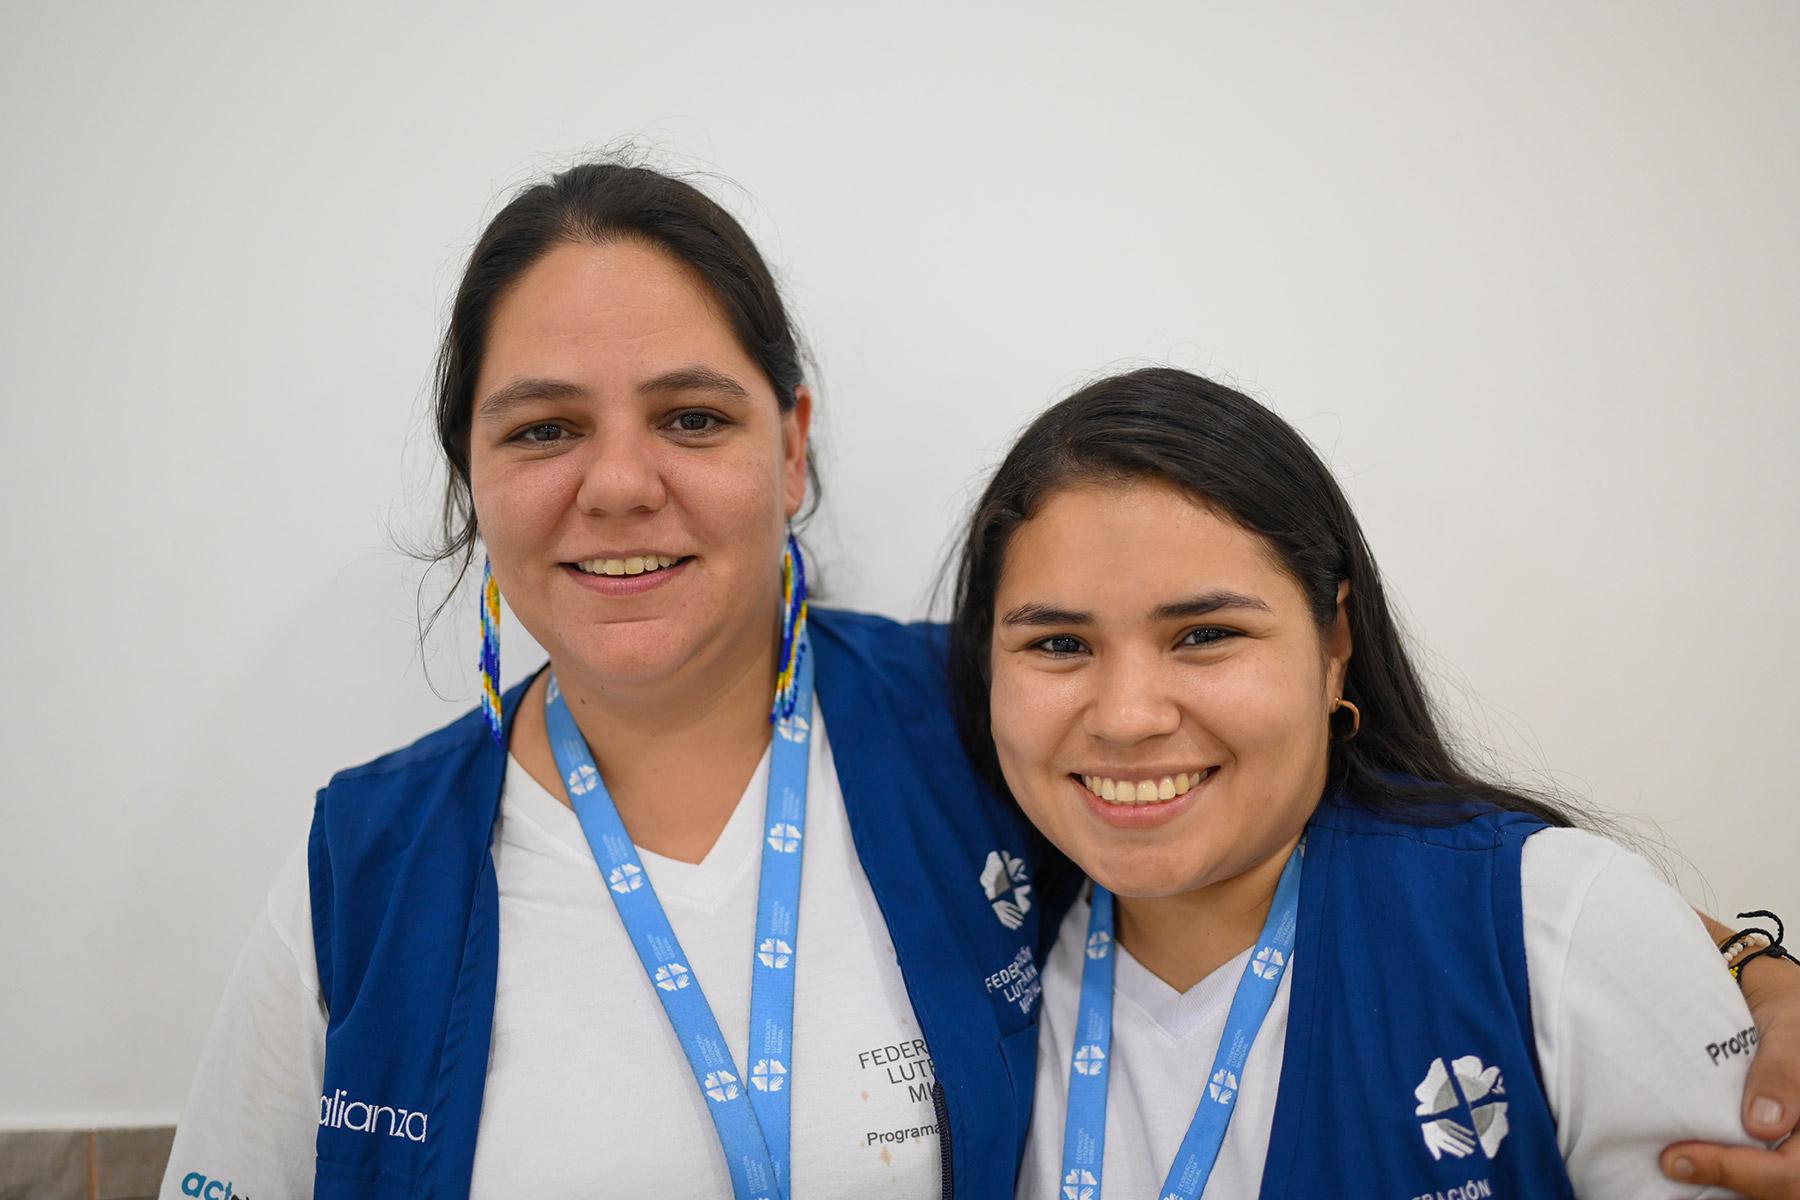 Together against land mines: Vanessa Vallejo Velásquez, the project's coordinator, and Angela Villamizar hope to be able to organize more peer-to-peer meetings for survivors across Colombia and to raise more public discourse about the reality shaped by landmines. Photo: FELM